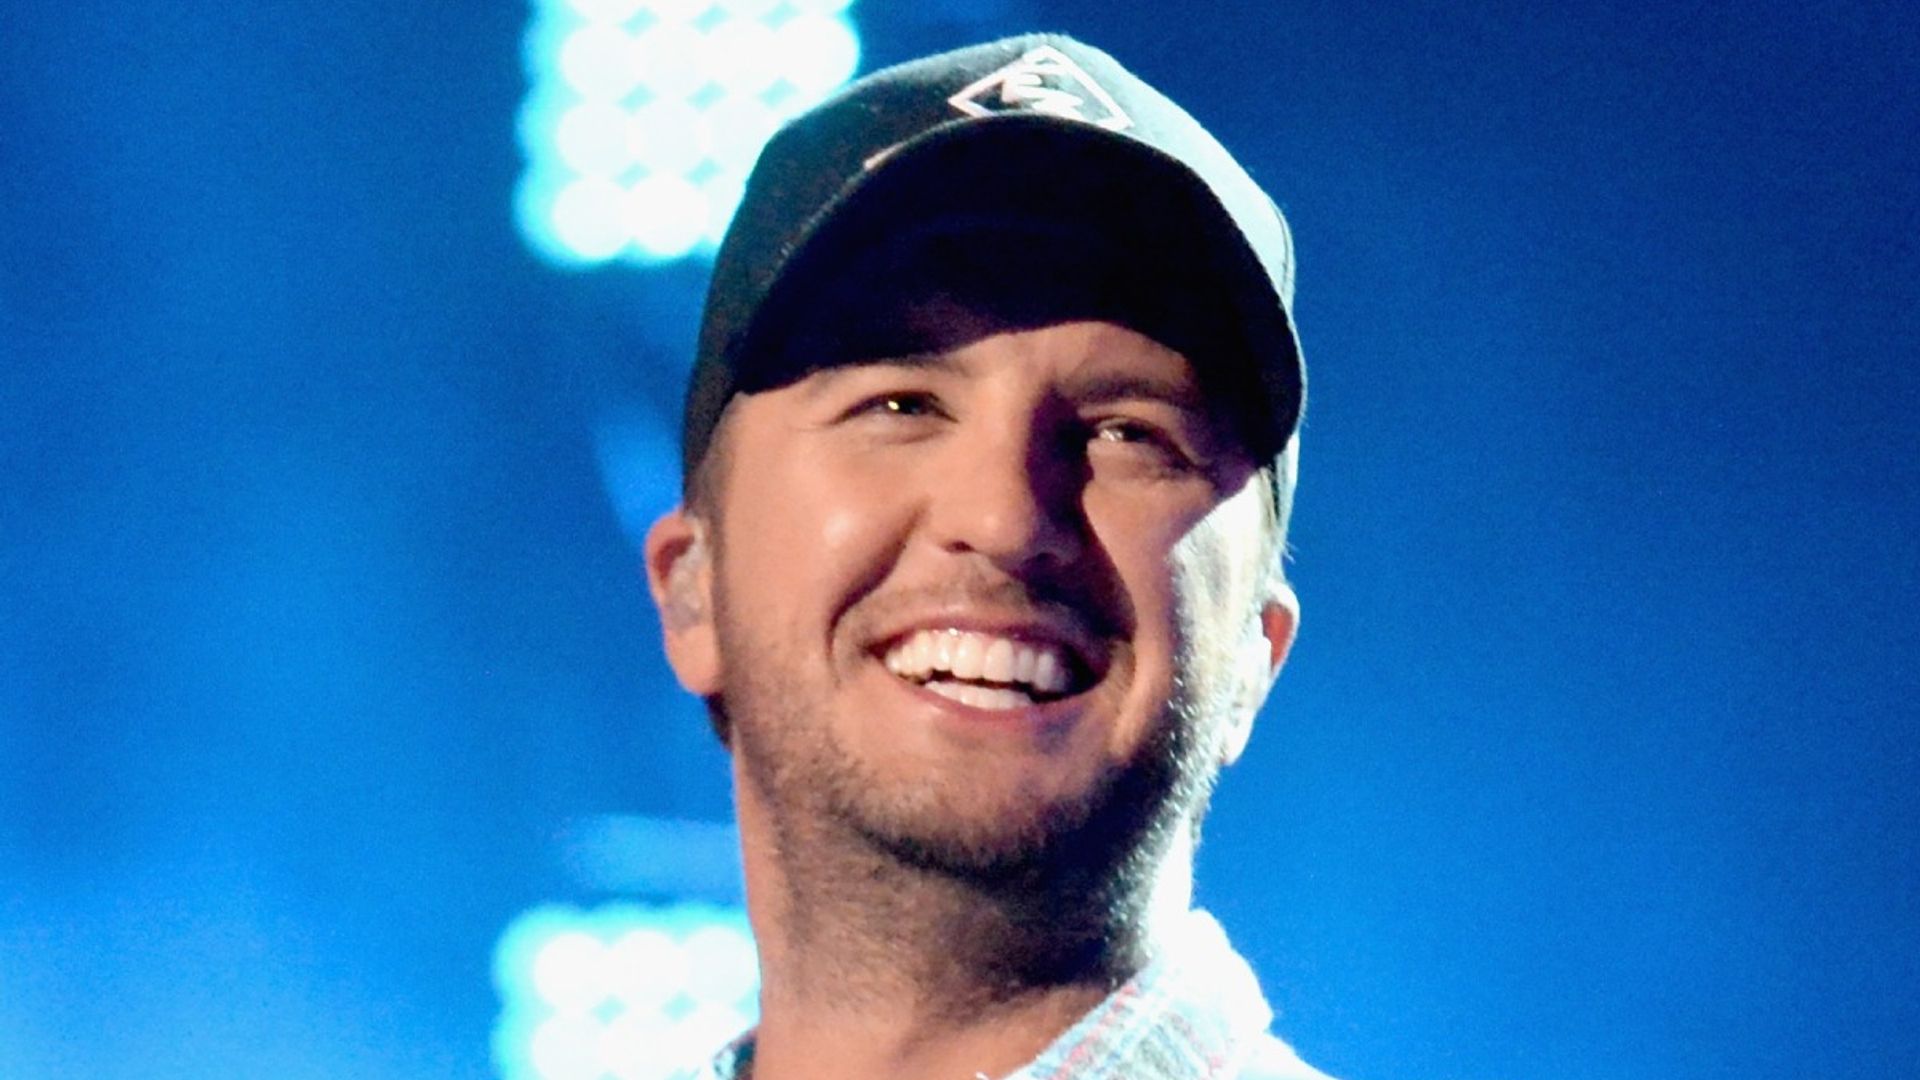 American Idol judge and country star Luke Bryan leaves fan in shock after generous offer